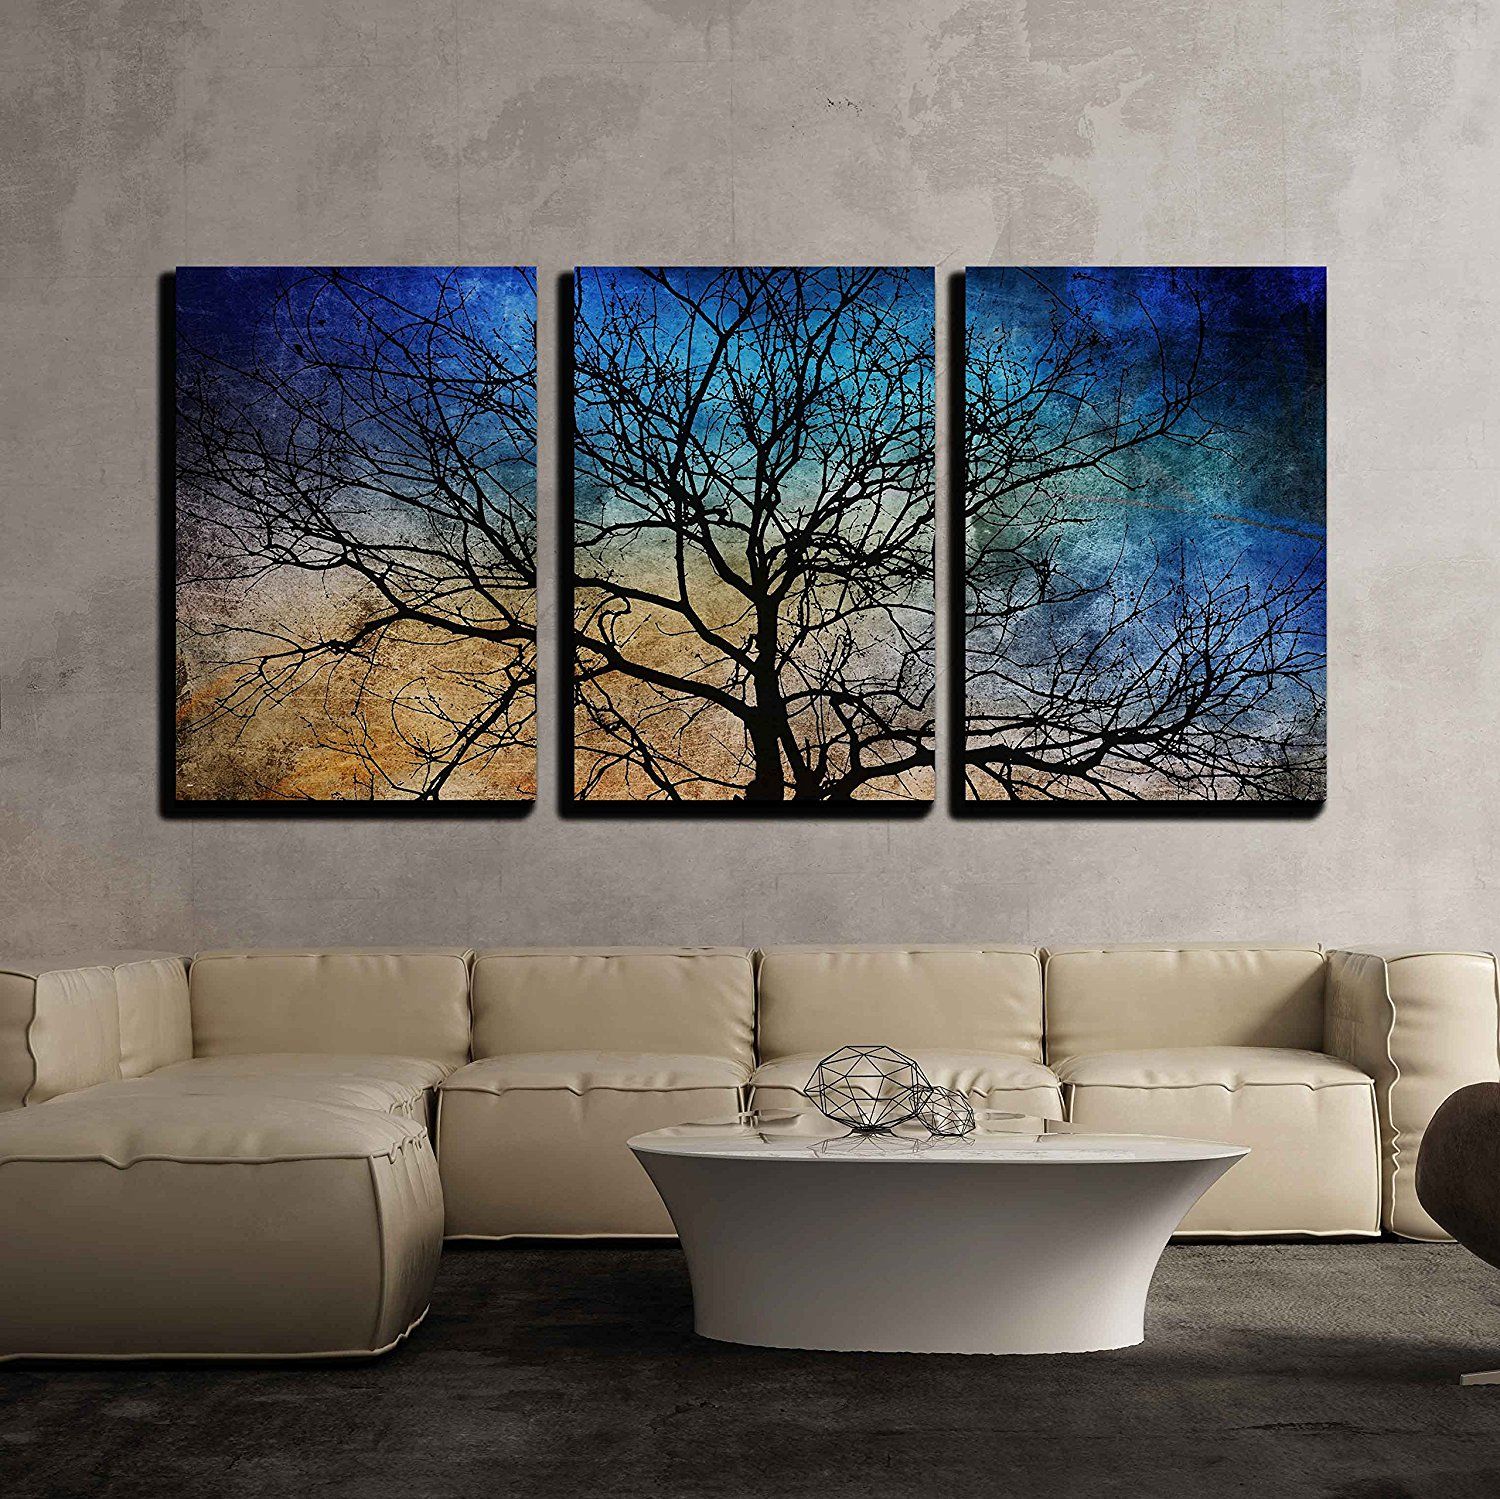 Wall26 3 Piece Canvas Wall Art – Black Tree Branches On Abstract Colorful  Background – Modern Home Decor Stretched And Framed Ready To Hang –  16"X24"X3 Panels – Walmart In Colorful Branching Wall Art (View 10 of 15)